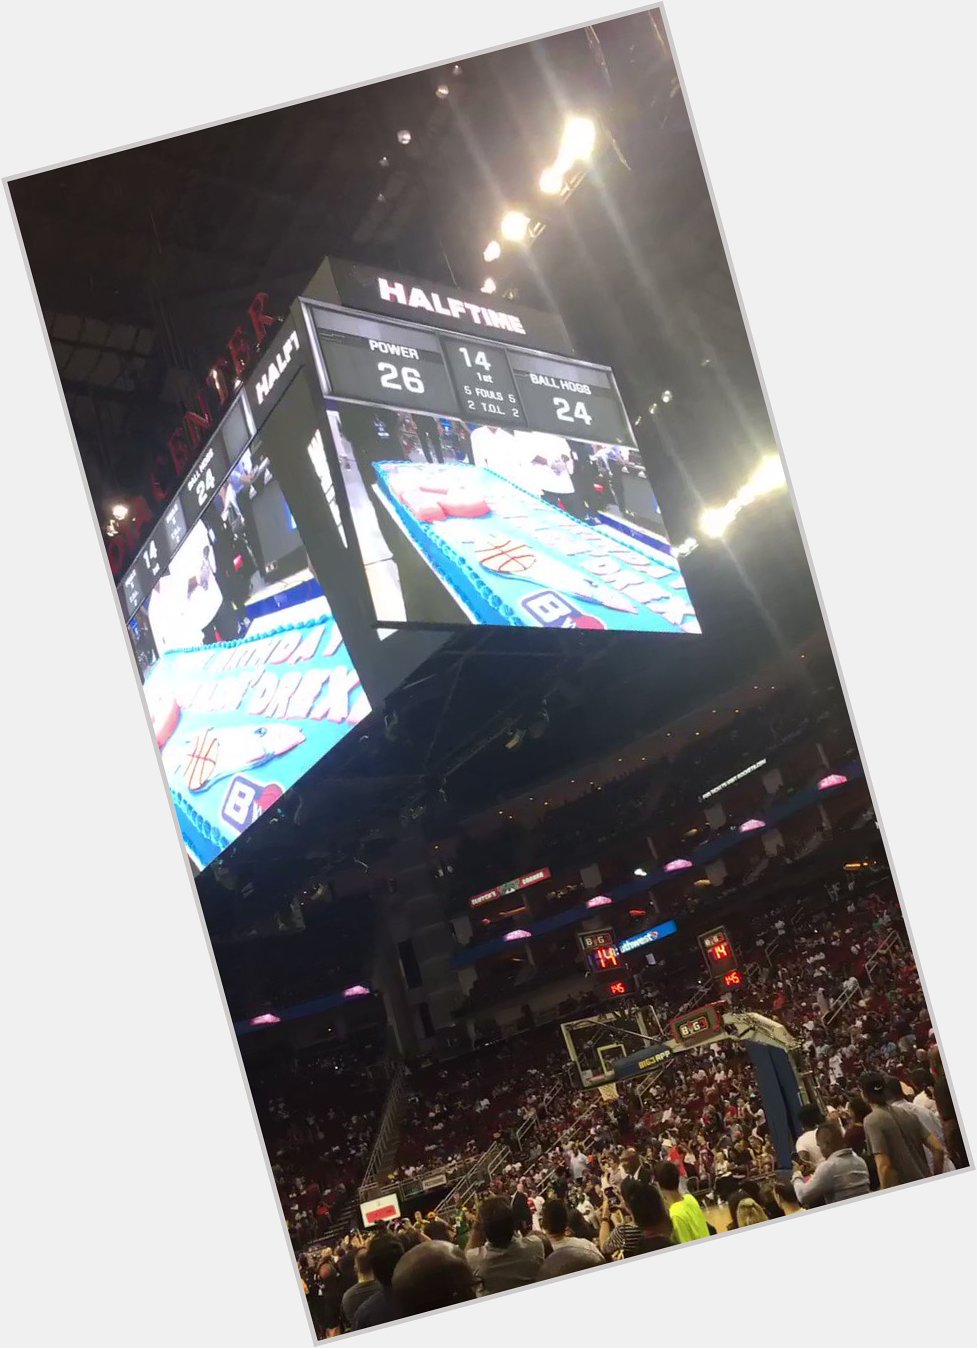 Ice Cube just sang Happy Birthday to Clyde Drexler at game in Houston! 